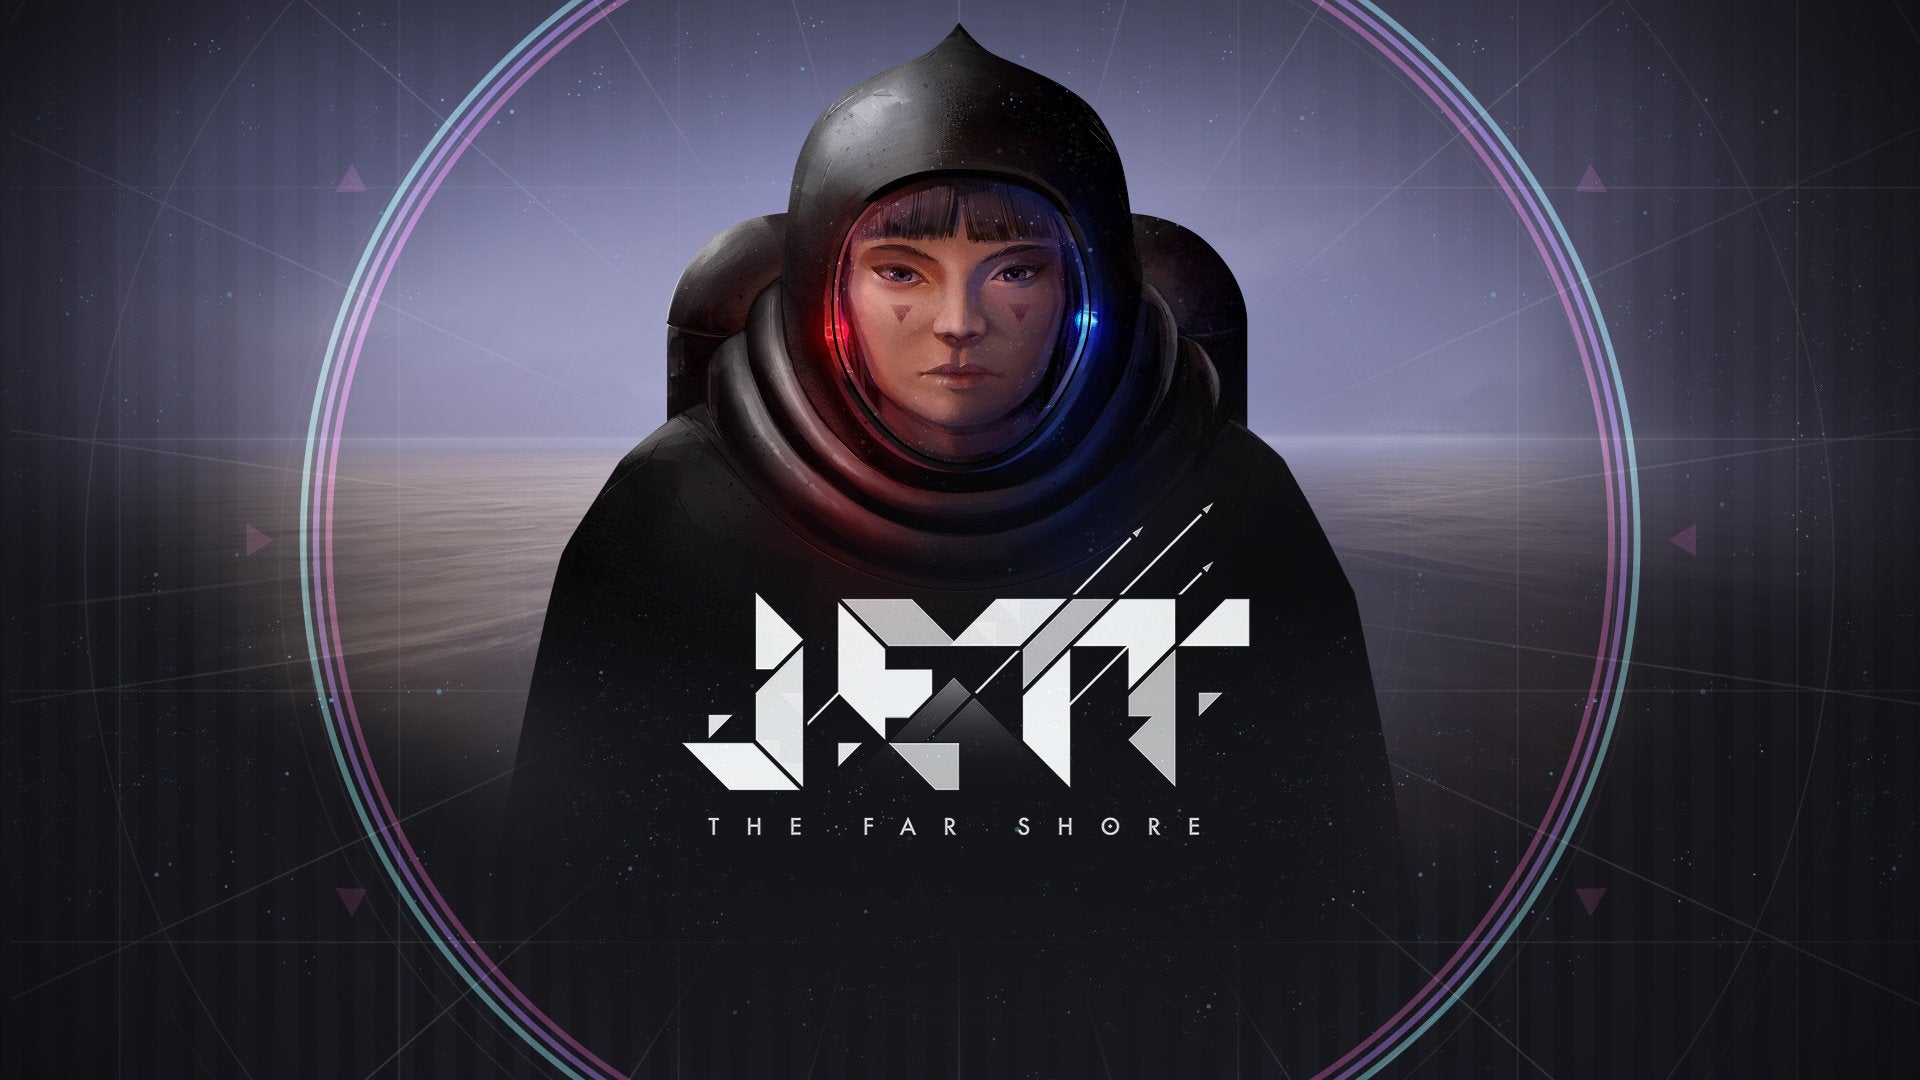 A girl in a space suit with the game logo Jett: The Far Shore in front of her